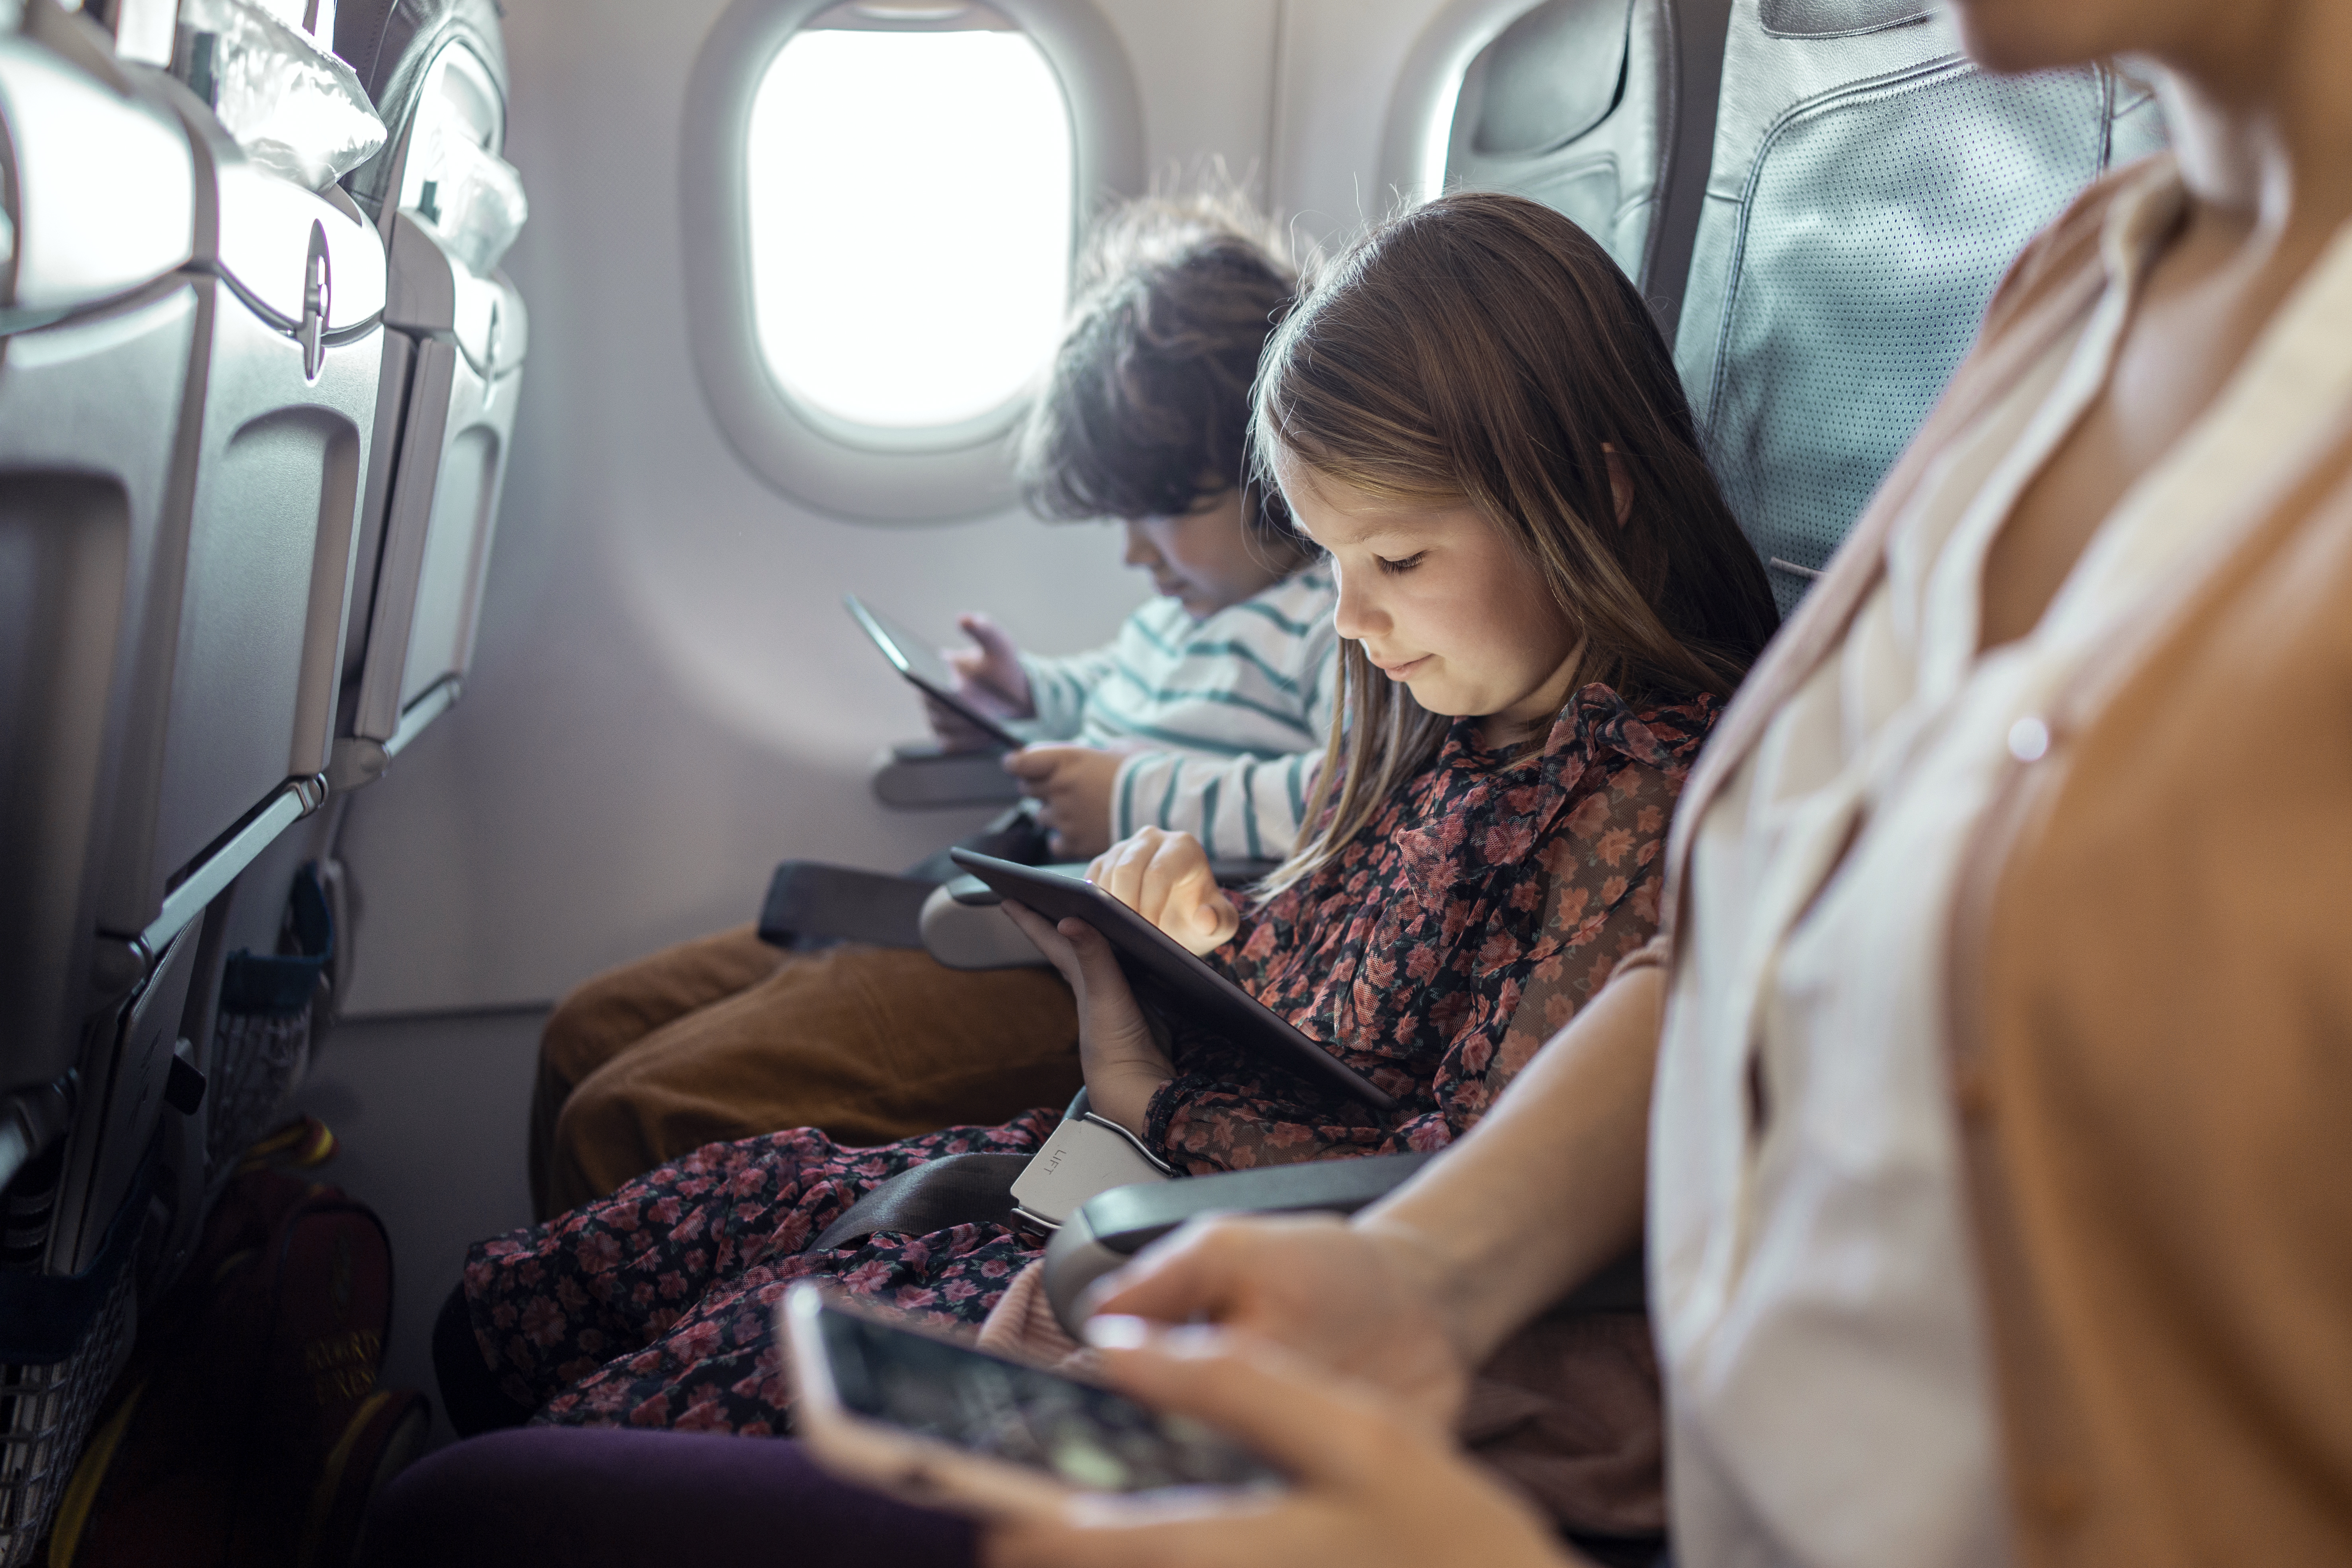 6 Products to Make Airline Travel More Comfortable